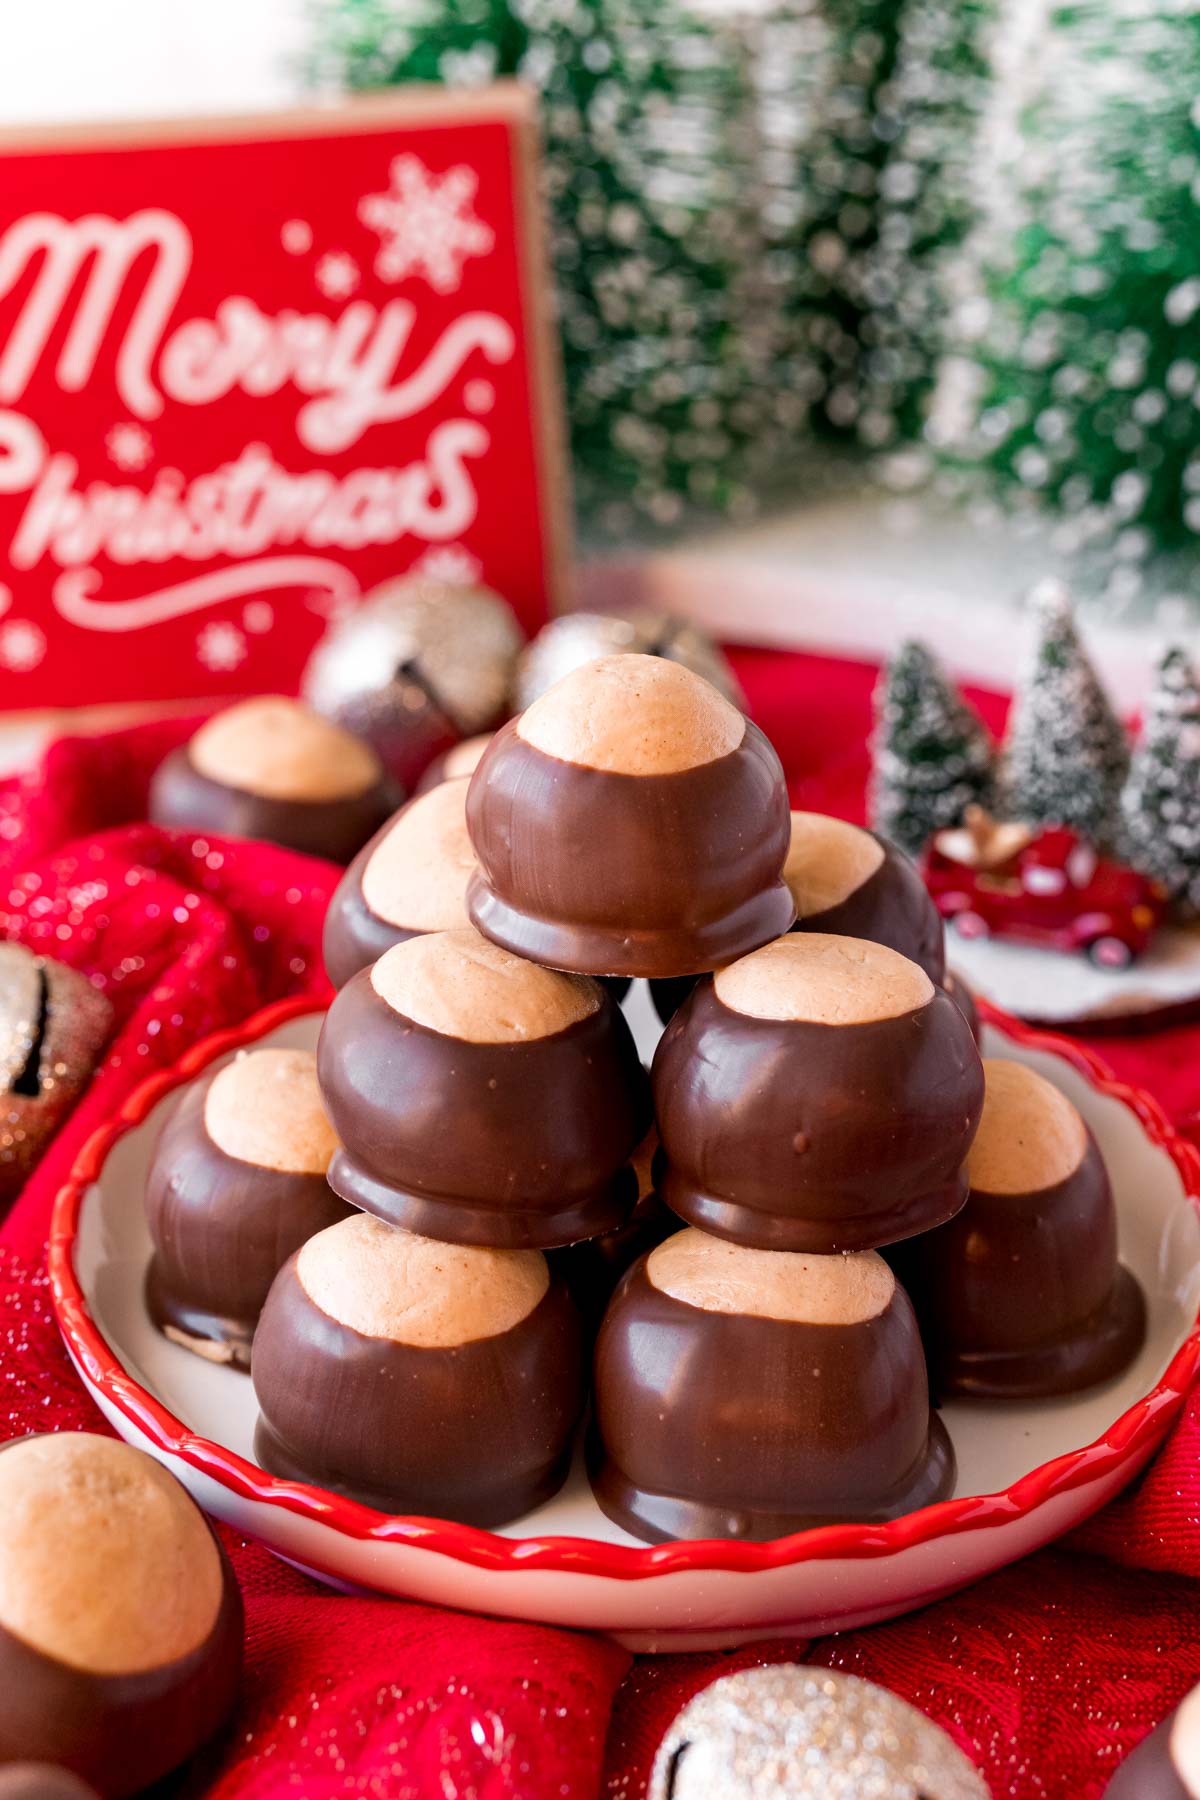 A stack of buckeye candies on a plate with holiday decorations around it.